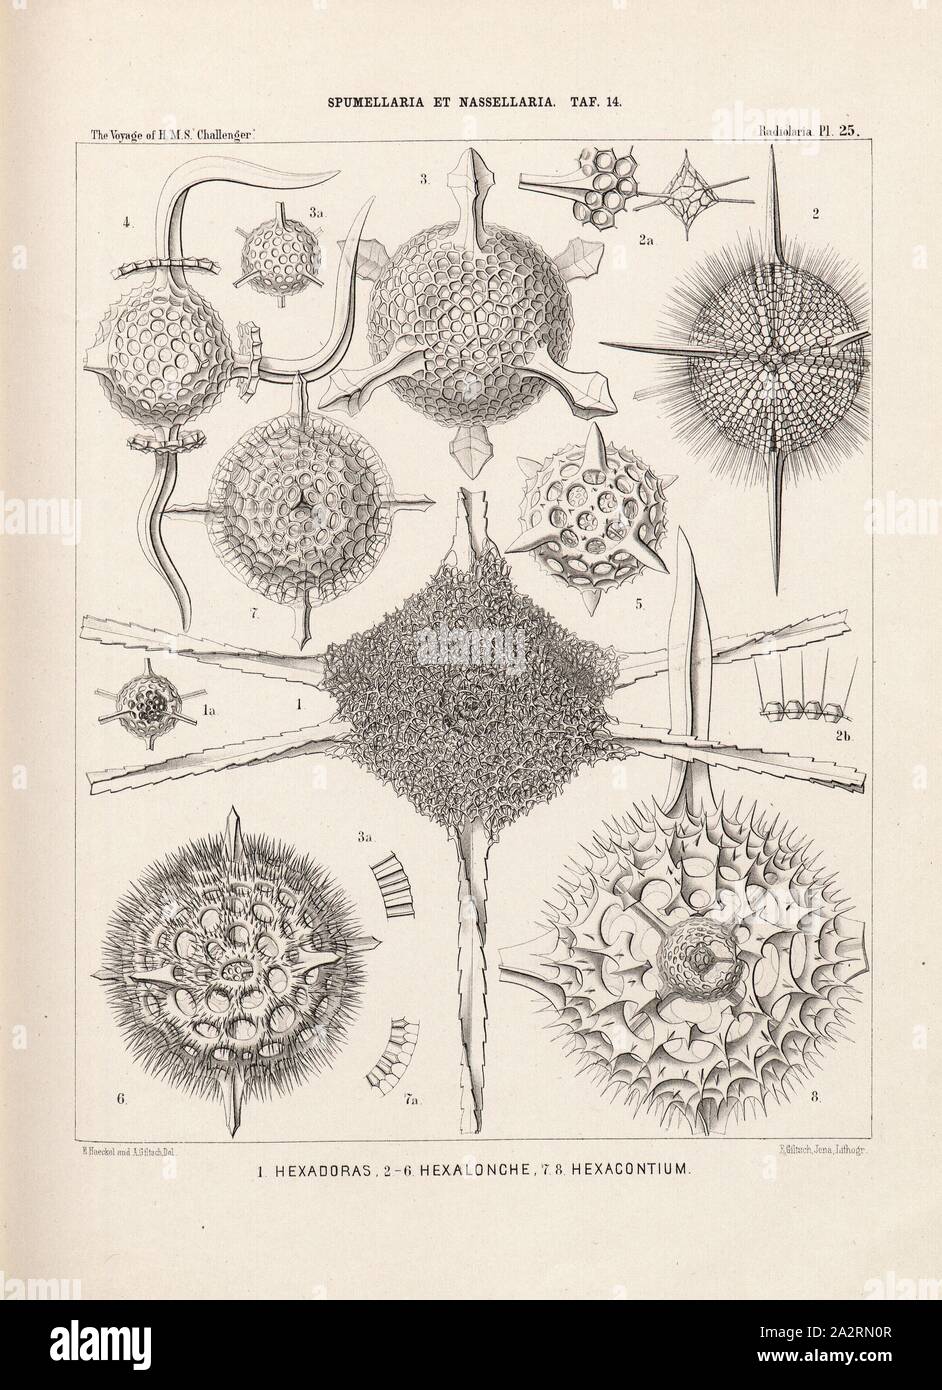 Hexadoras, Hexalonche, Hexacontium, Illustration of various radiolarians of the Spumellaria and Nassellaria groups from the 19th century, signed: E.Haeckel and A. Giltsch Del, F. Giltsch, Jena, Lithogr, Pl. 25, after p. 248, Haeckel, Ernst (del.); Giltsch, A. (del.); Giltsch, F. (lith.); Jena (lith.), 1862, Ernst Haeckel: Die Radiolarien (Rhizopoda Radiaria). Zweiter Theil. Berlin: Verlag von Georg Reimer, 1862 Stock Photo